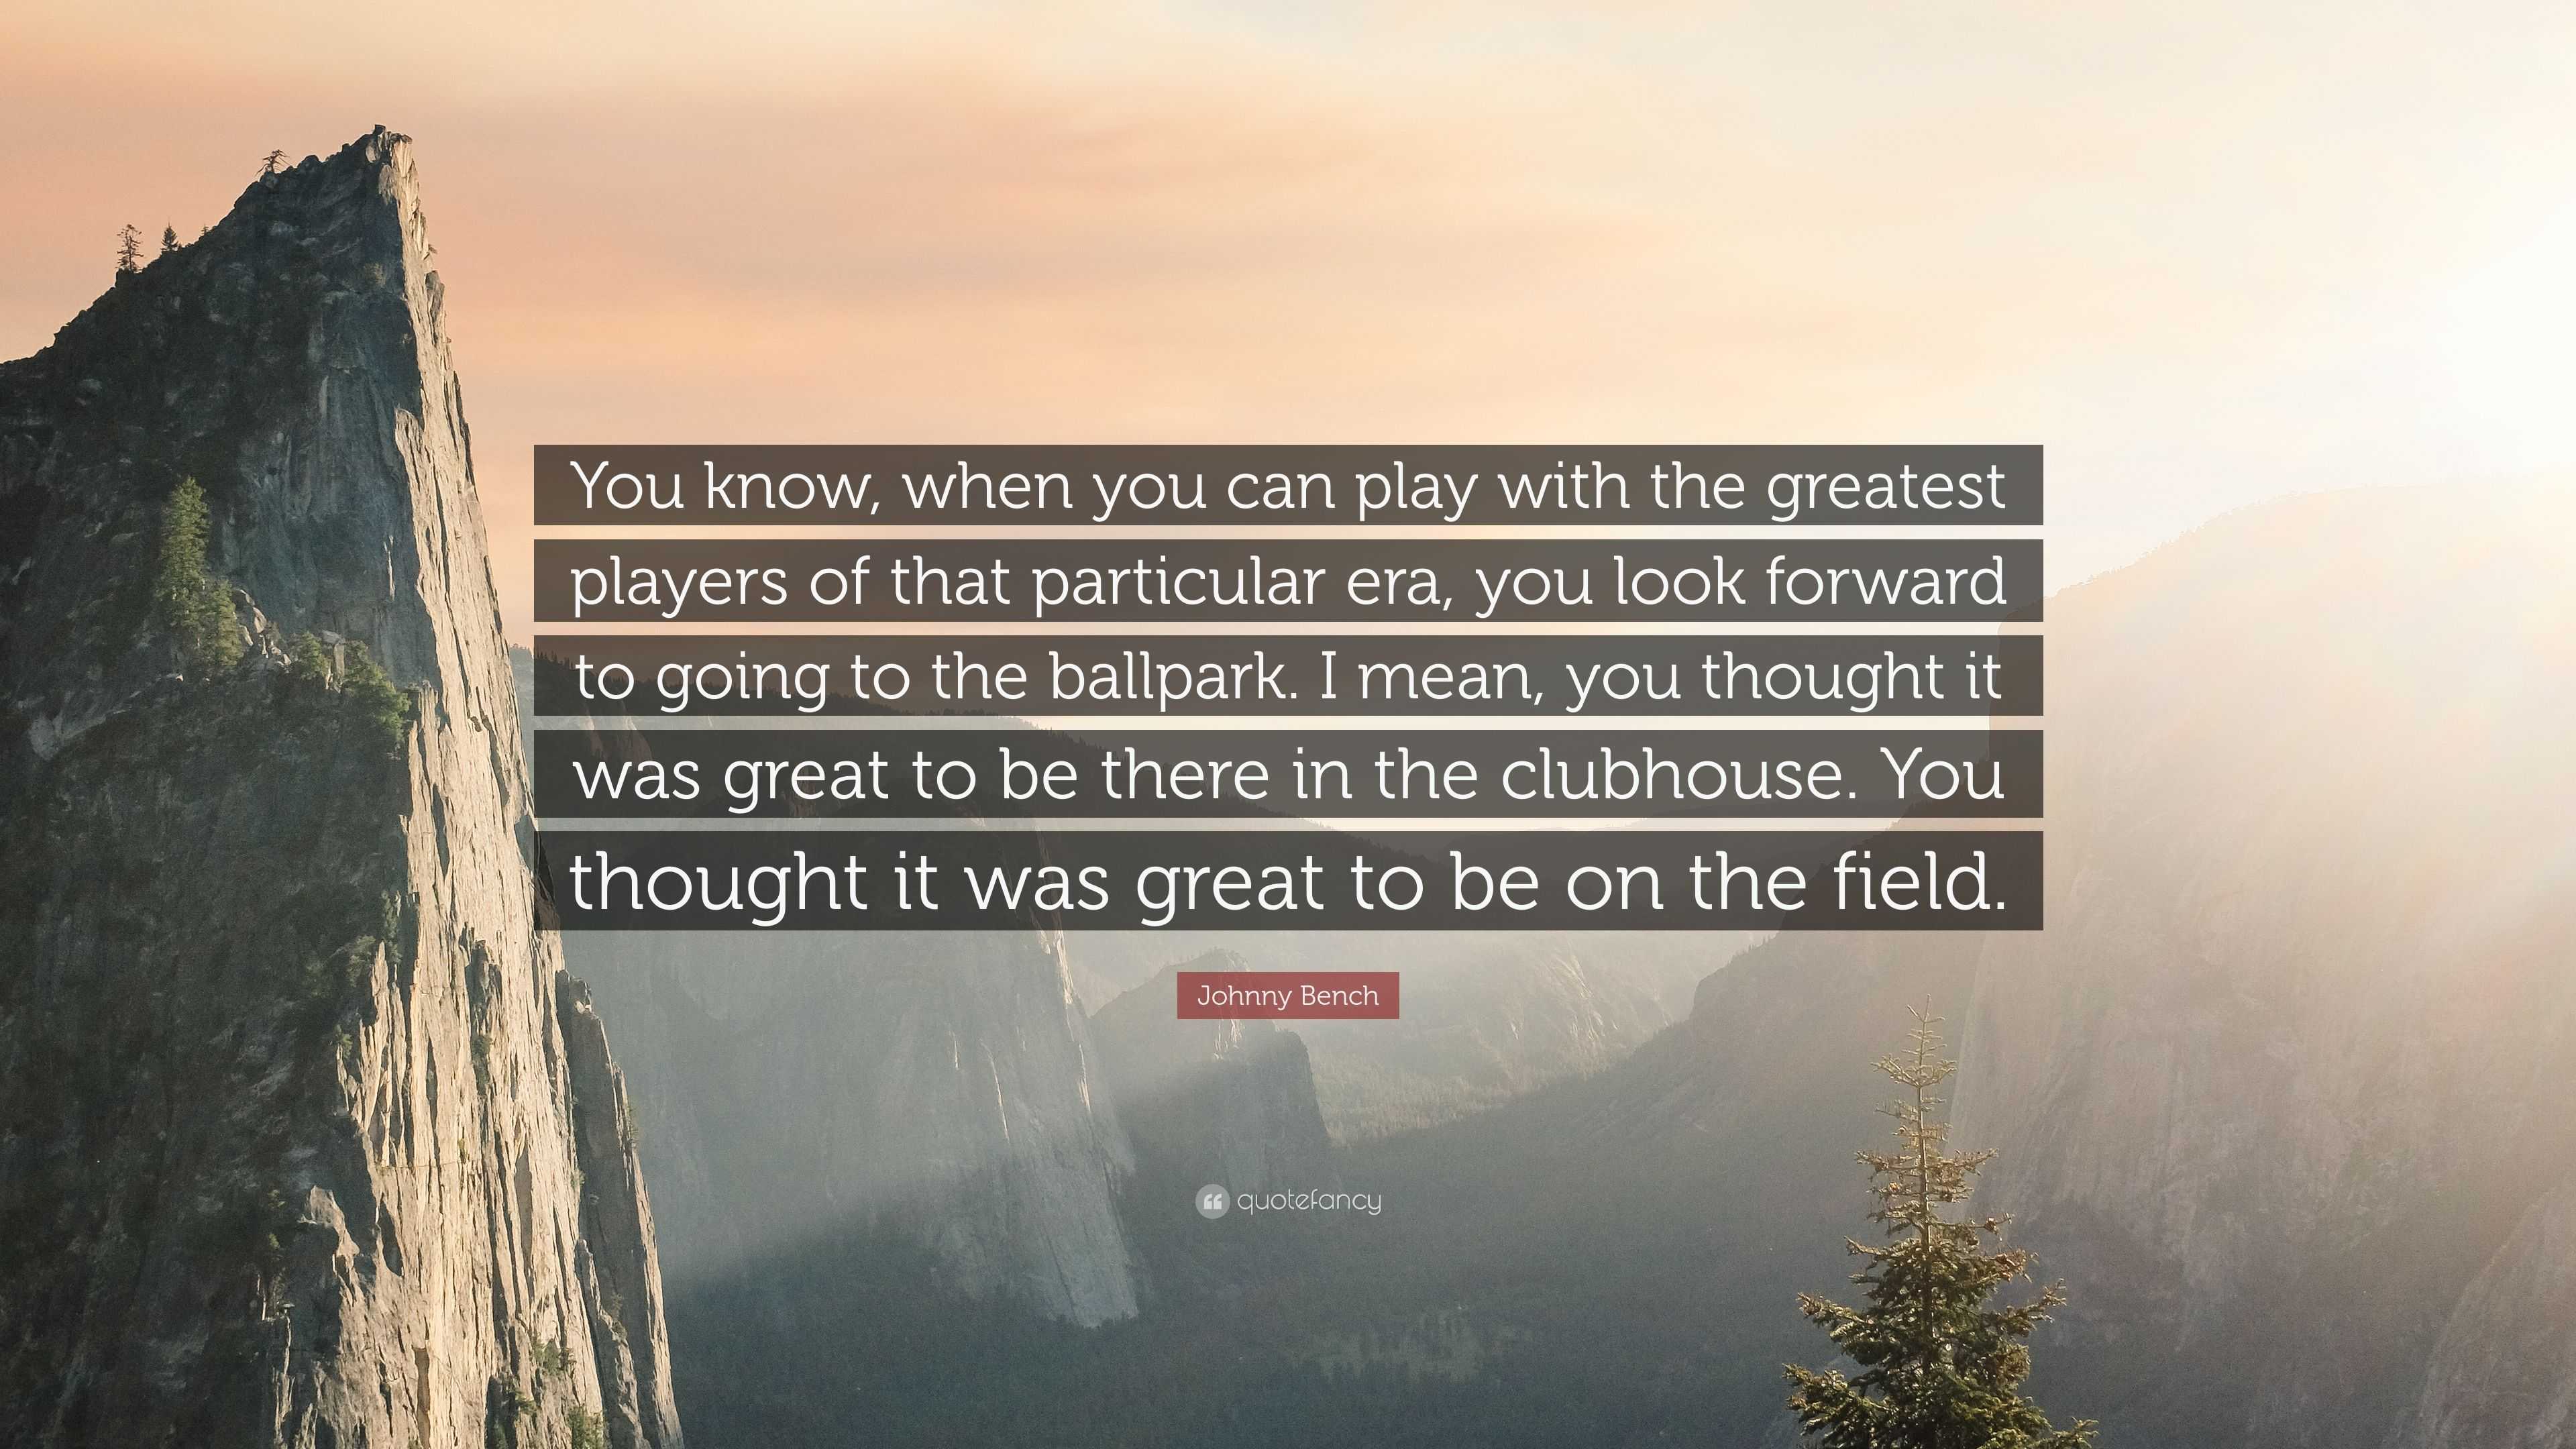 Johnny Bench Quote: “You know, when you can play with the greatest